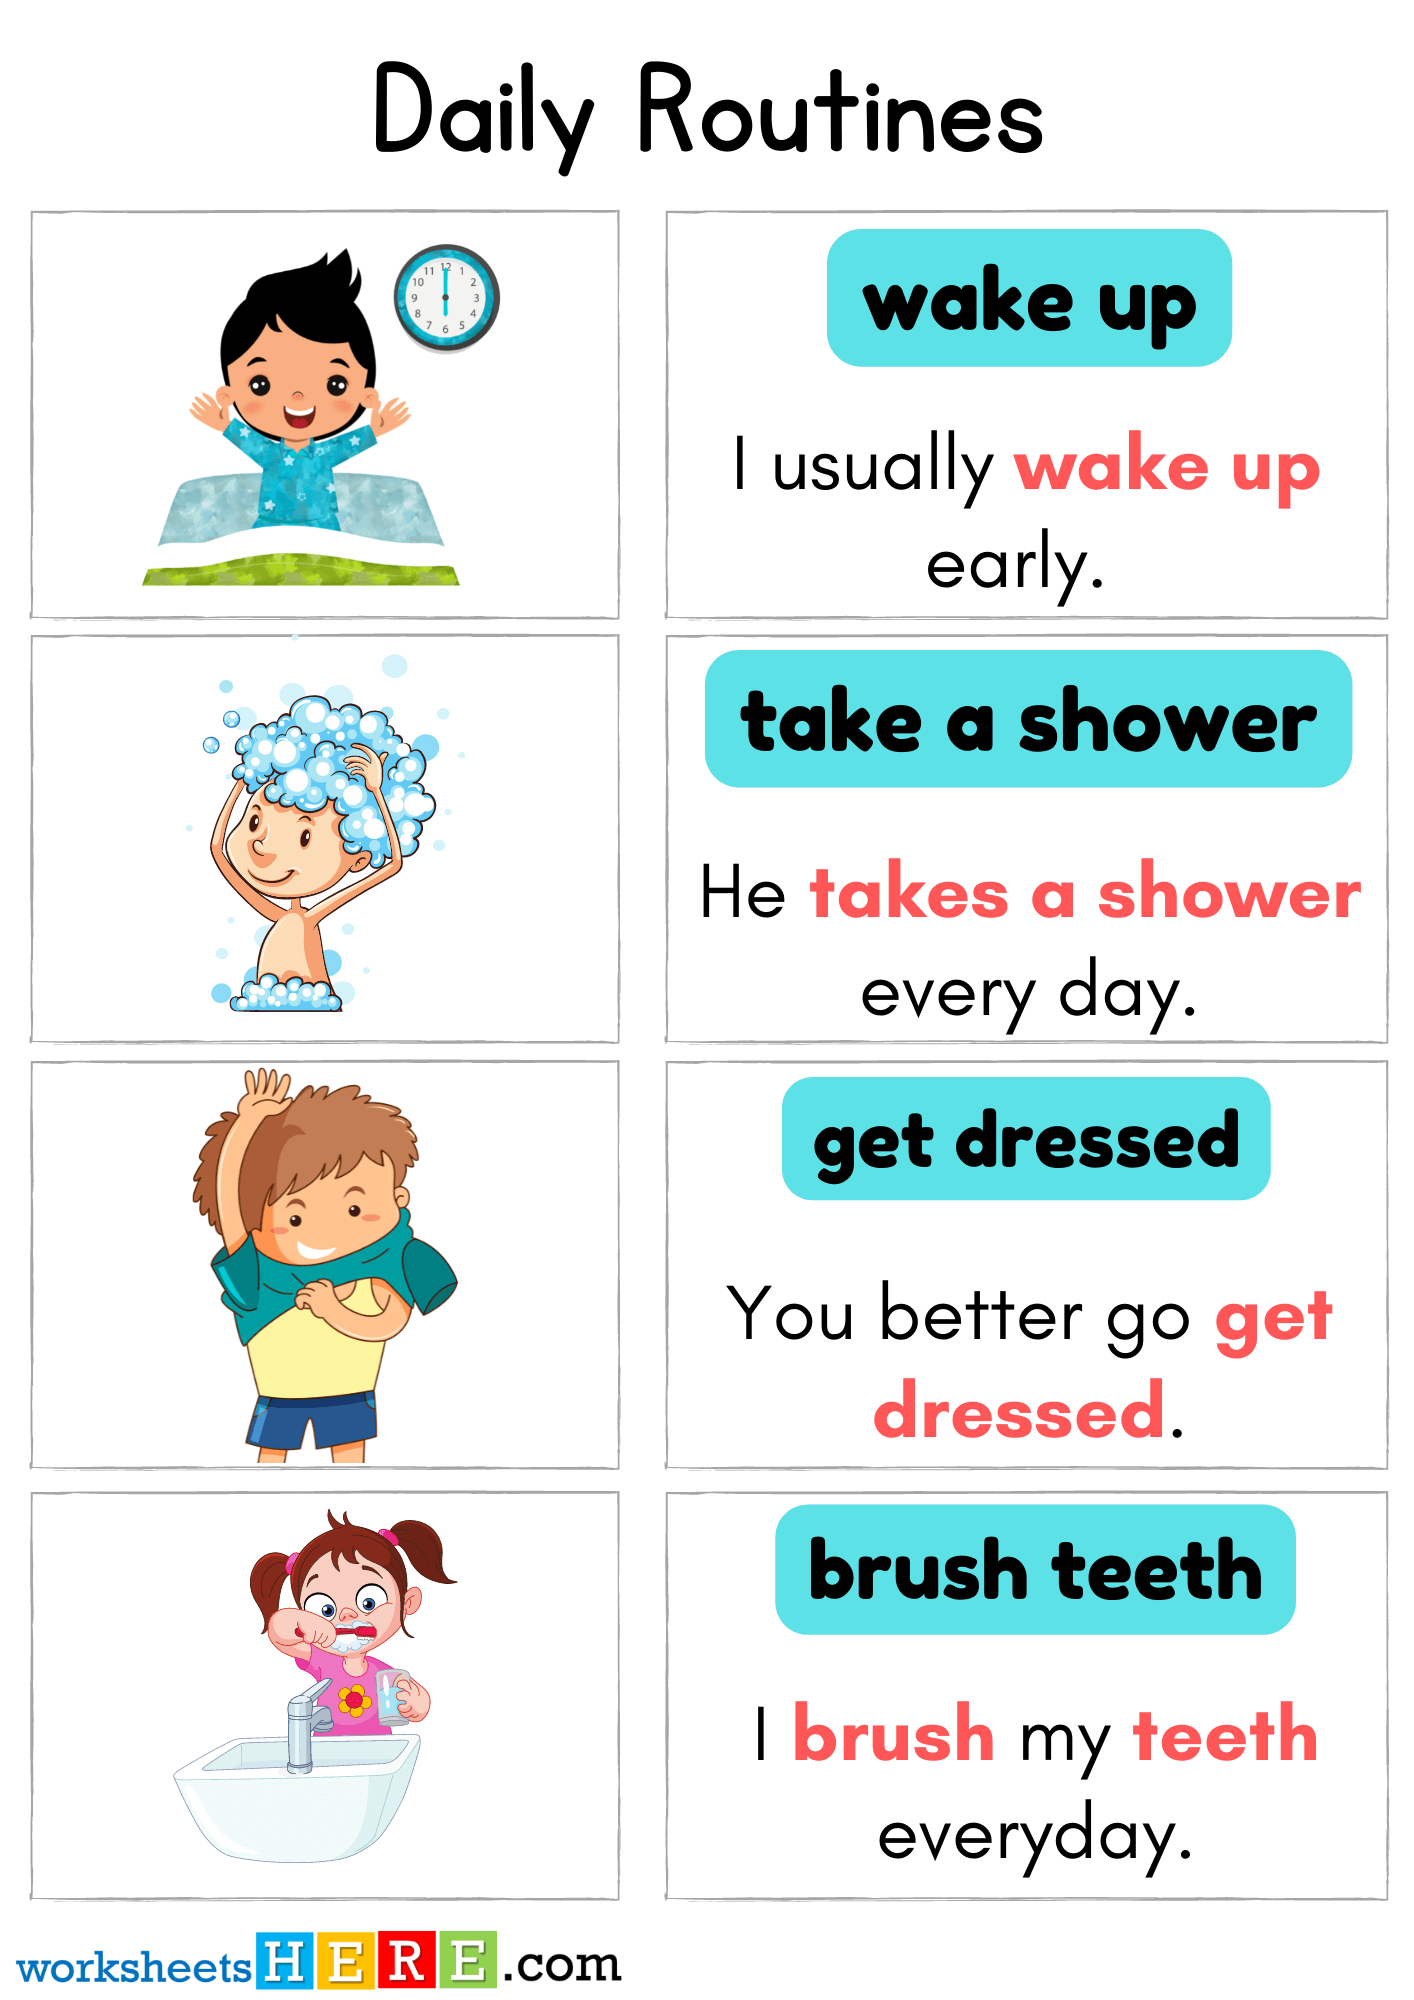 Daily Routines Verbs with Pictures and Sentences PDF Worksheet For Kids and Students